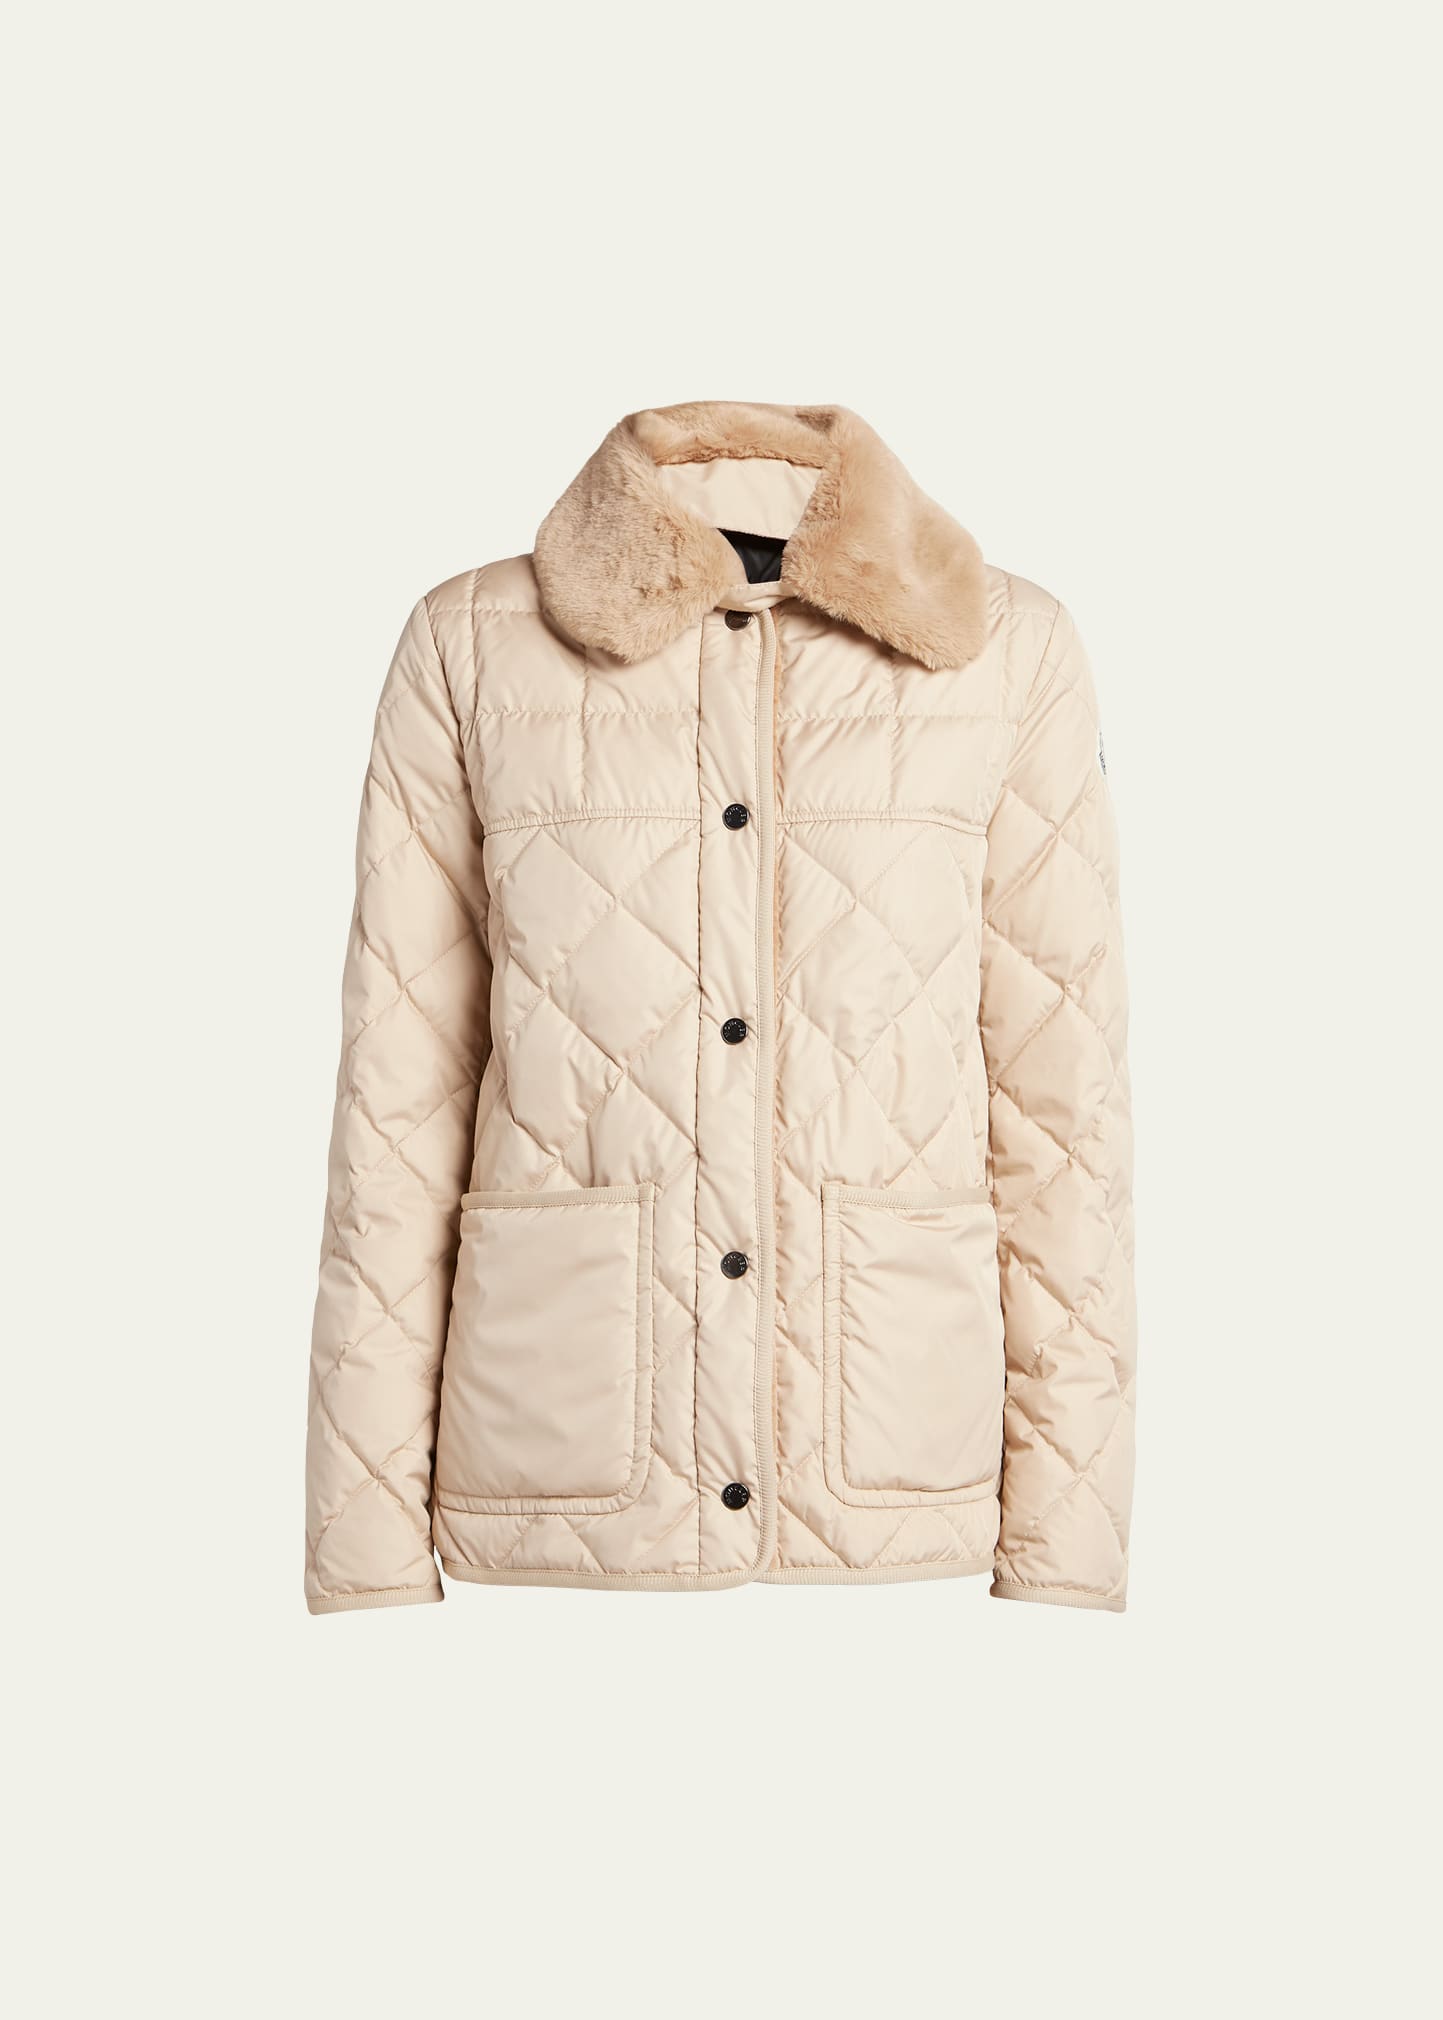 Cygne Quilted Jacket with Faux Fur Trim